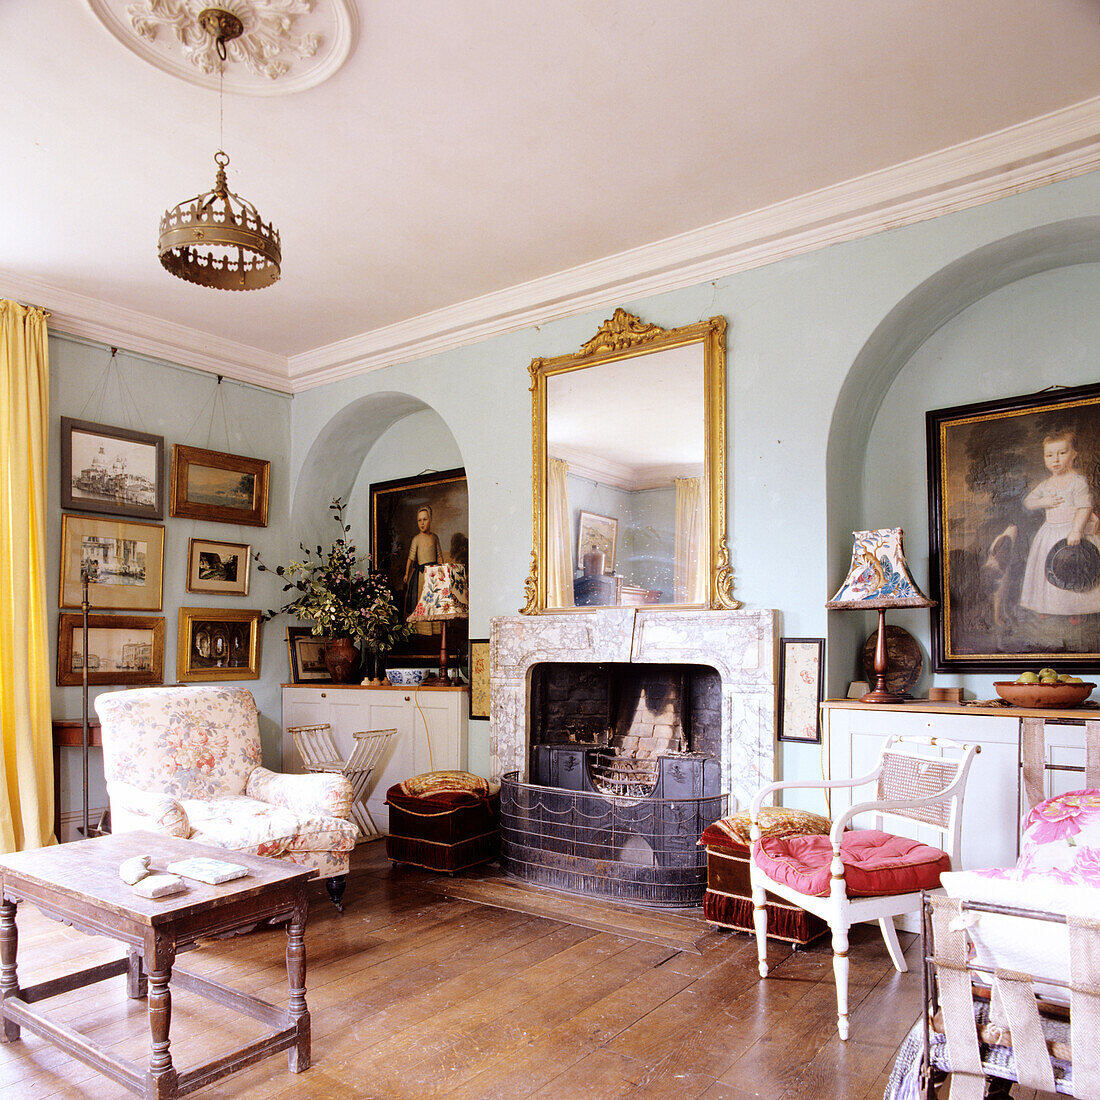 Historic living room with fireplace, gold-framed mirror and picture gallery